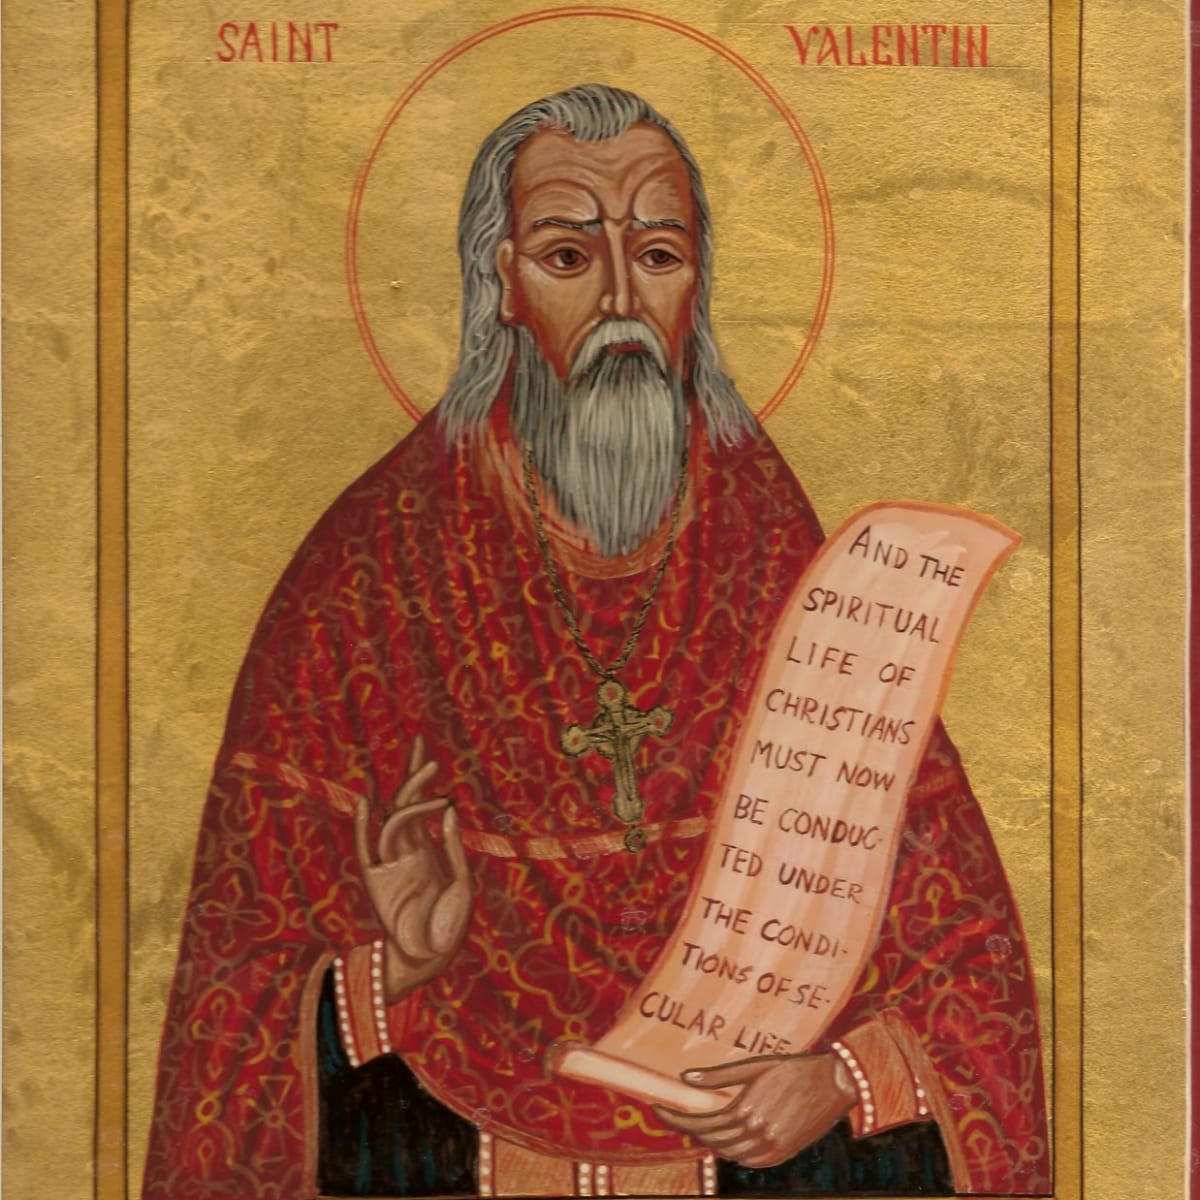 In the two centuries that followed the death of Christ, at least two separate accounts record how early Christian martyrs, all apparently called Valentine (or, in latin Valentinus), met with their ends on 14th February.